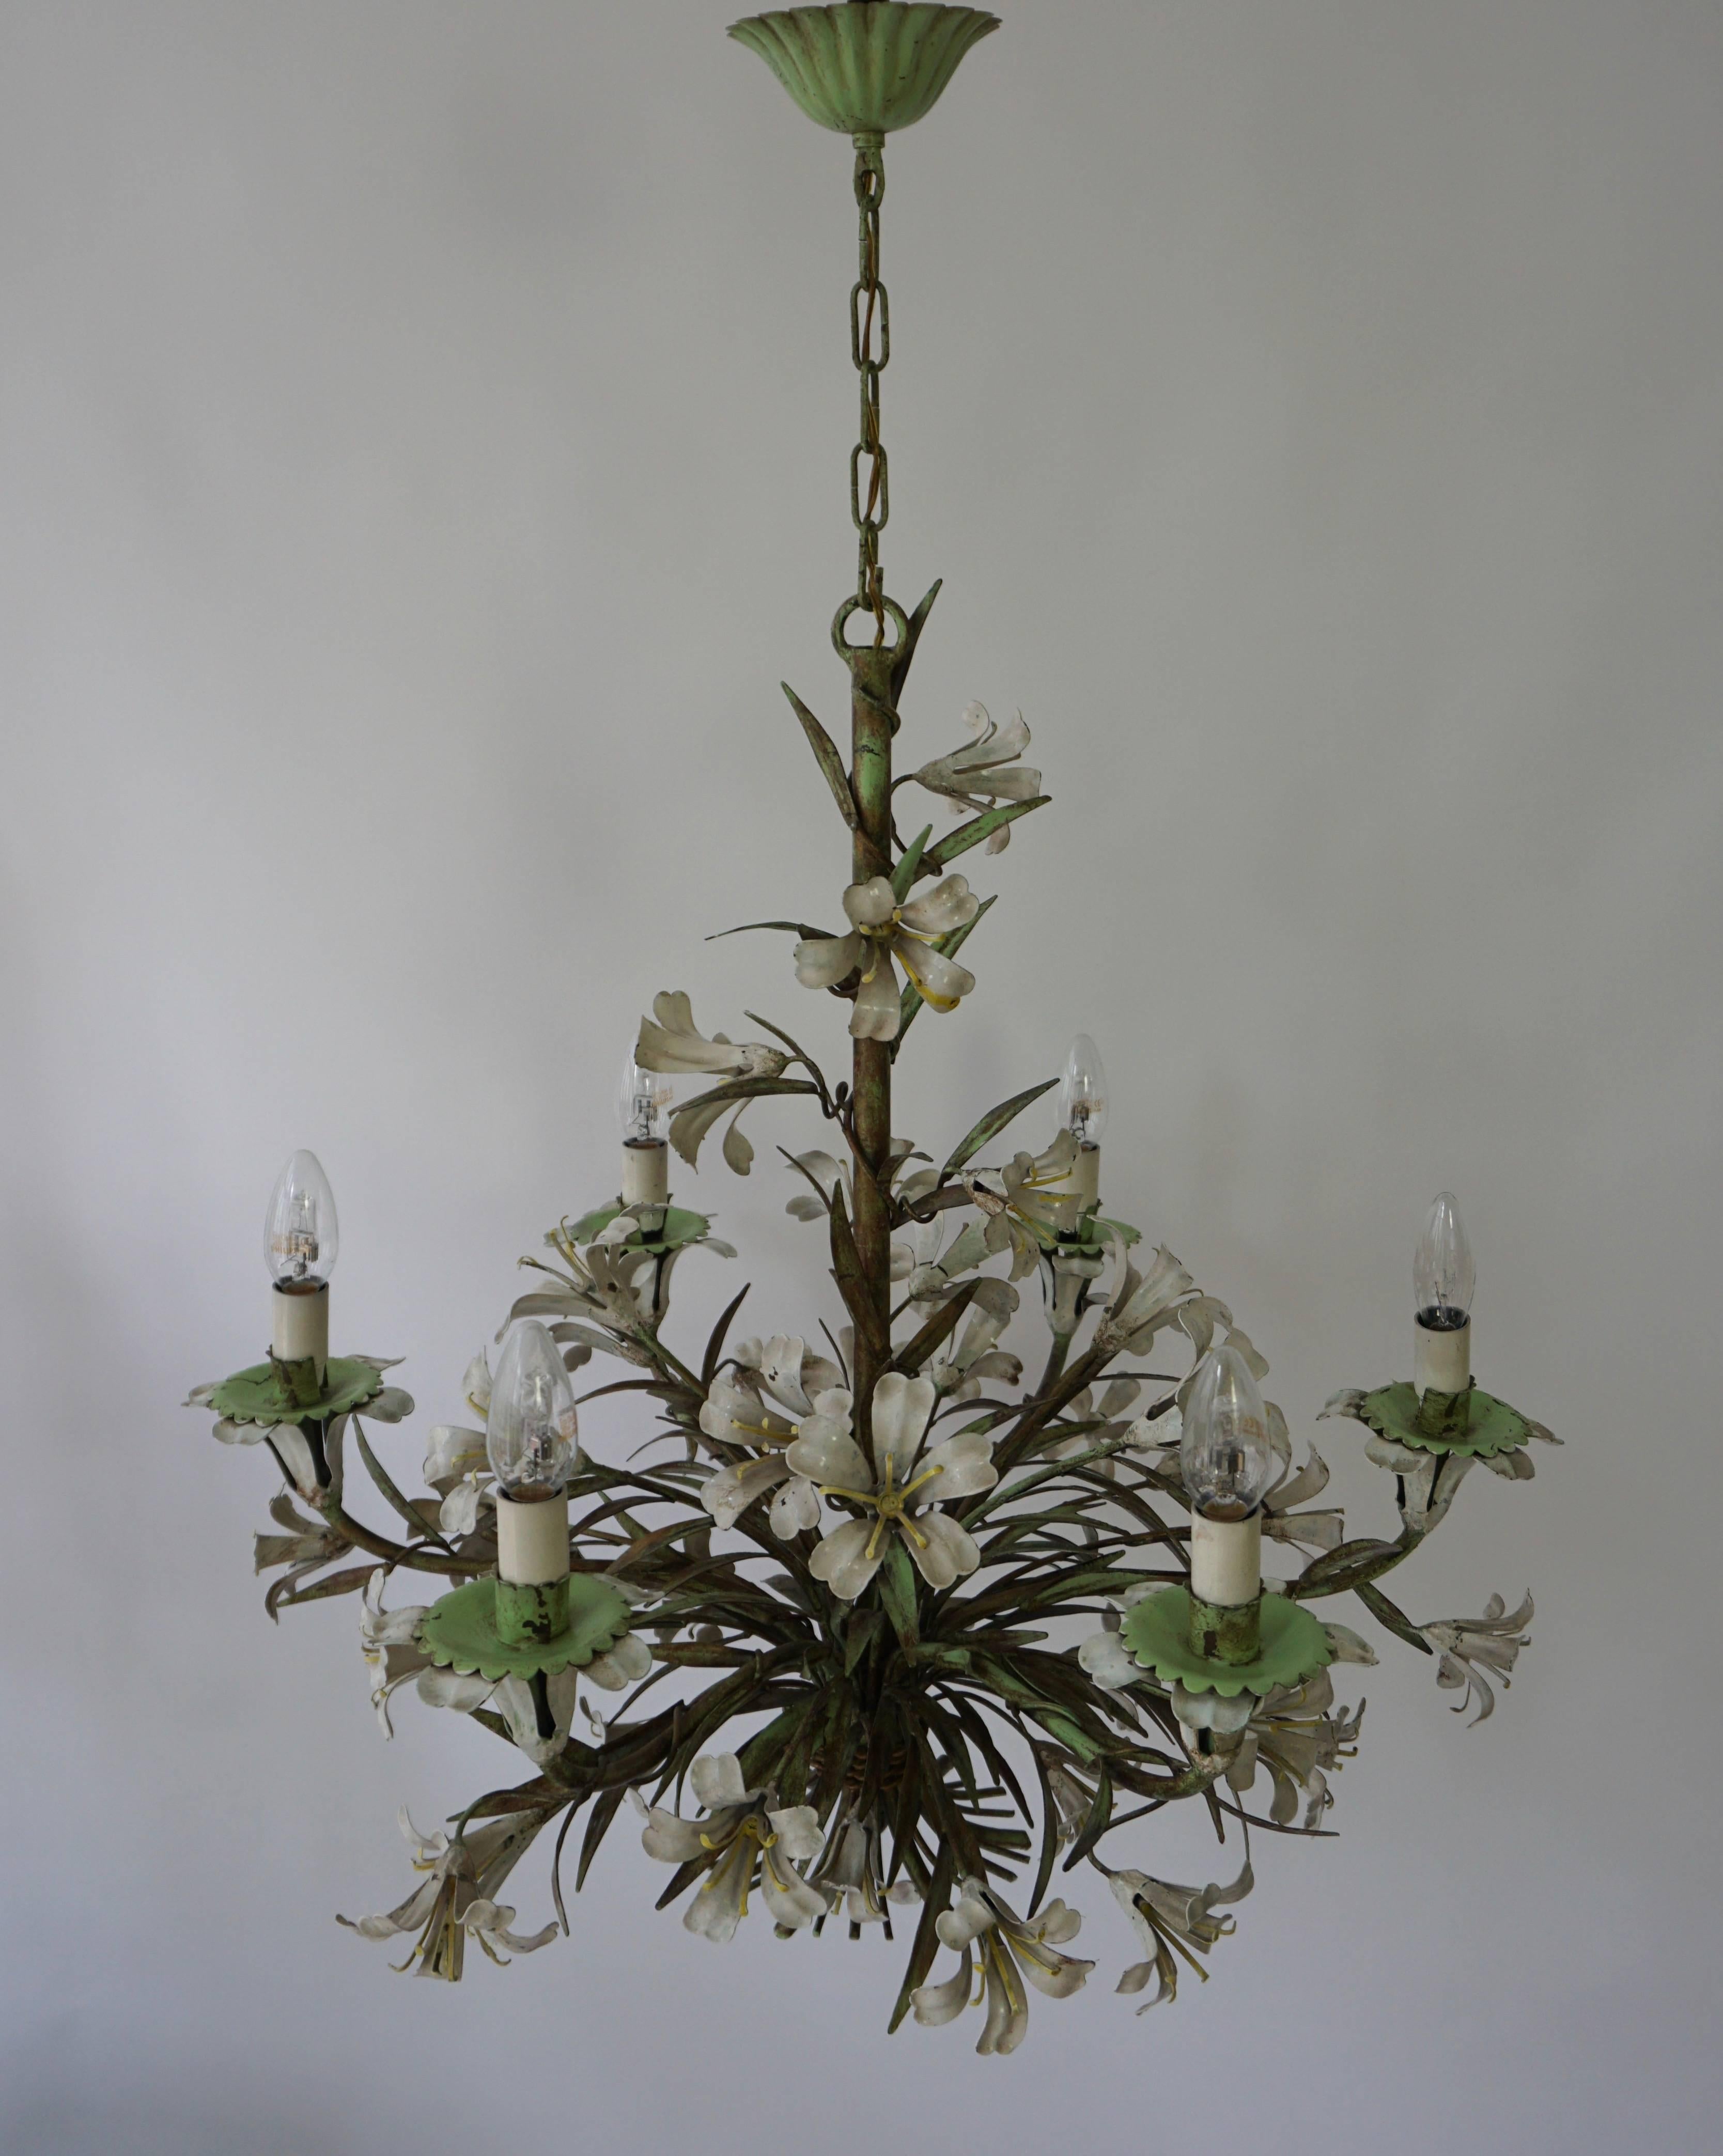 Italian metal painted flower chandelier.
Measures: Diameter 65 cm,
height 65 cm,
height with the chain is 90 cm.
Six E14 bulbs.